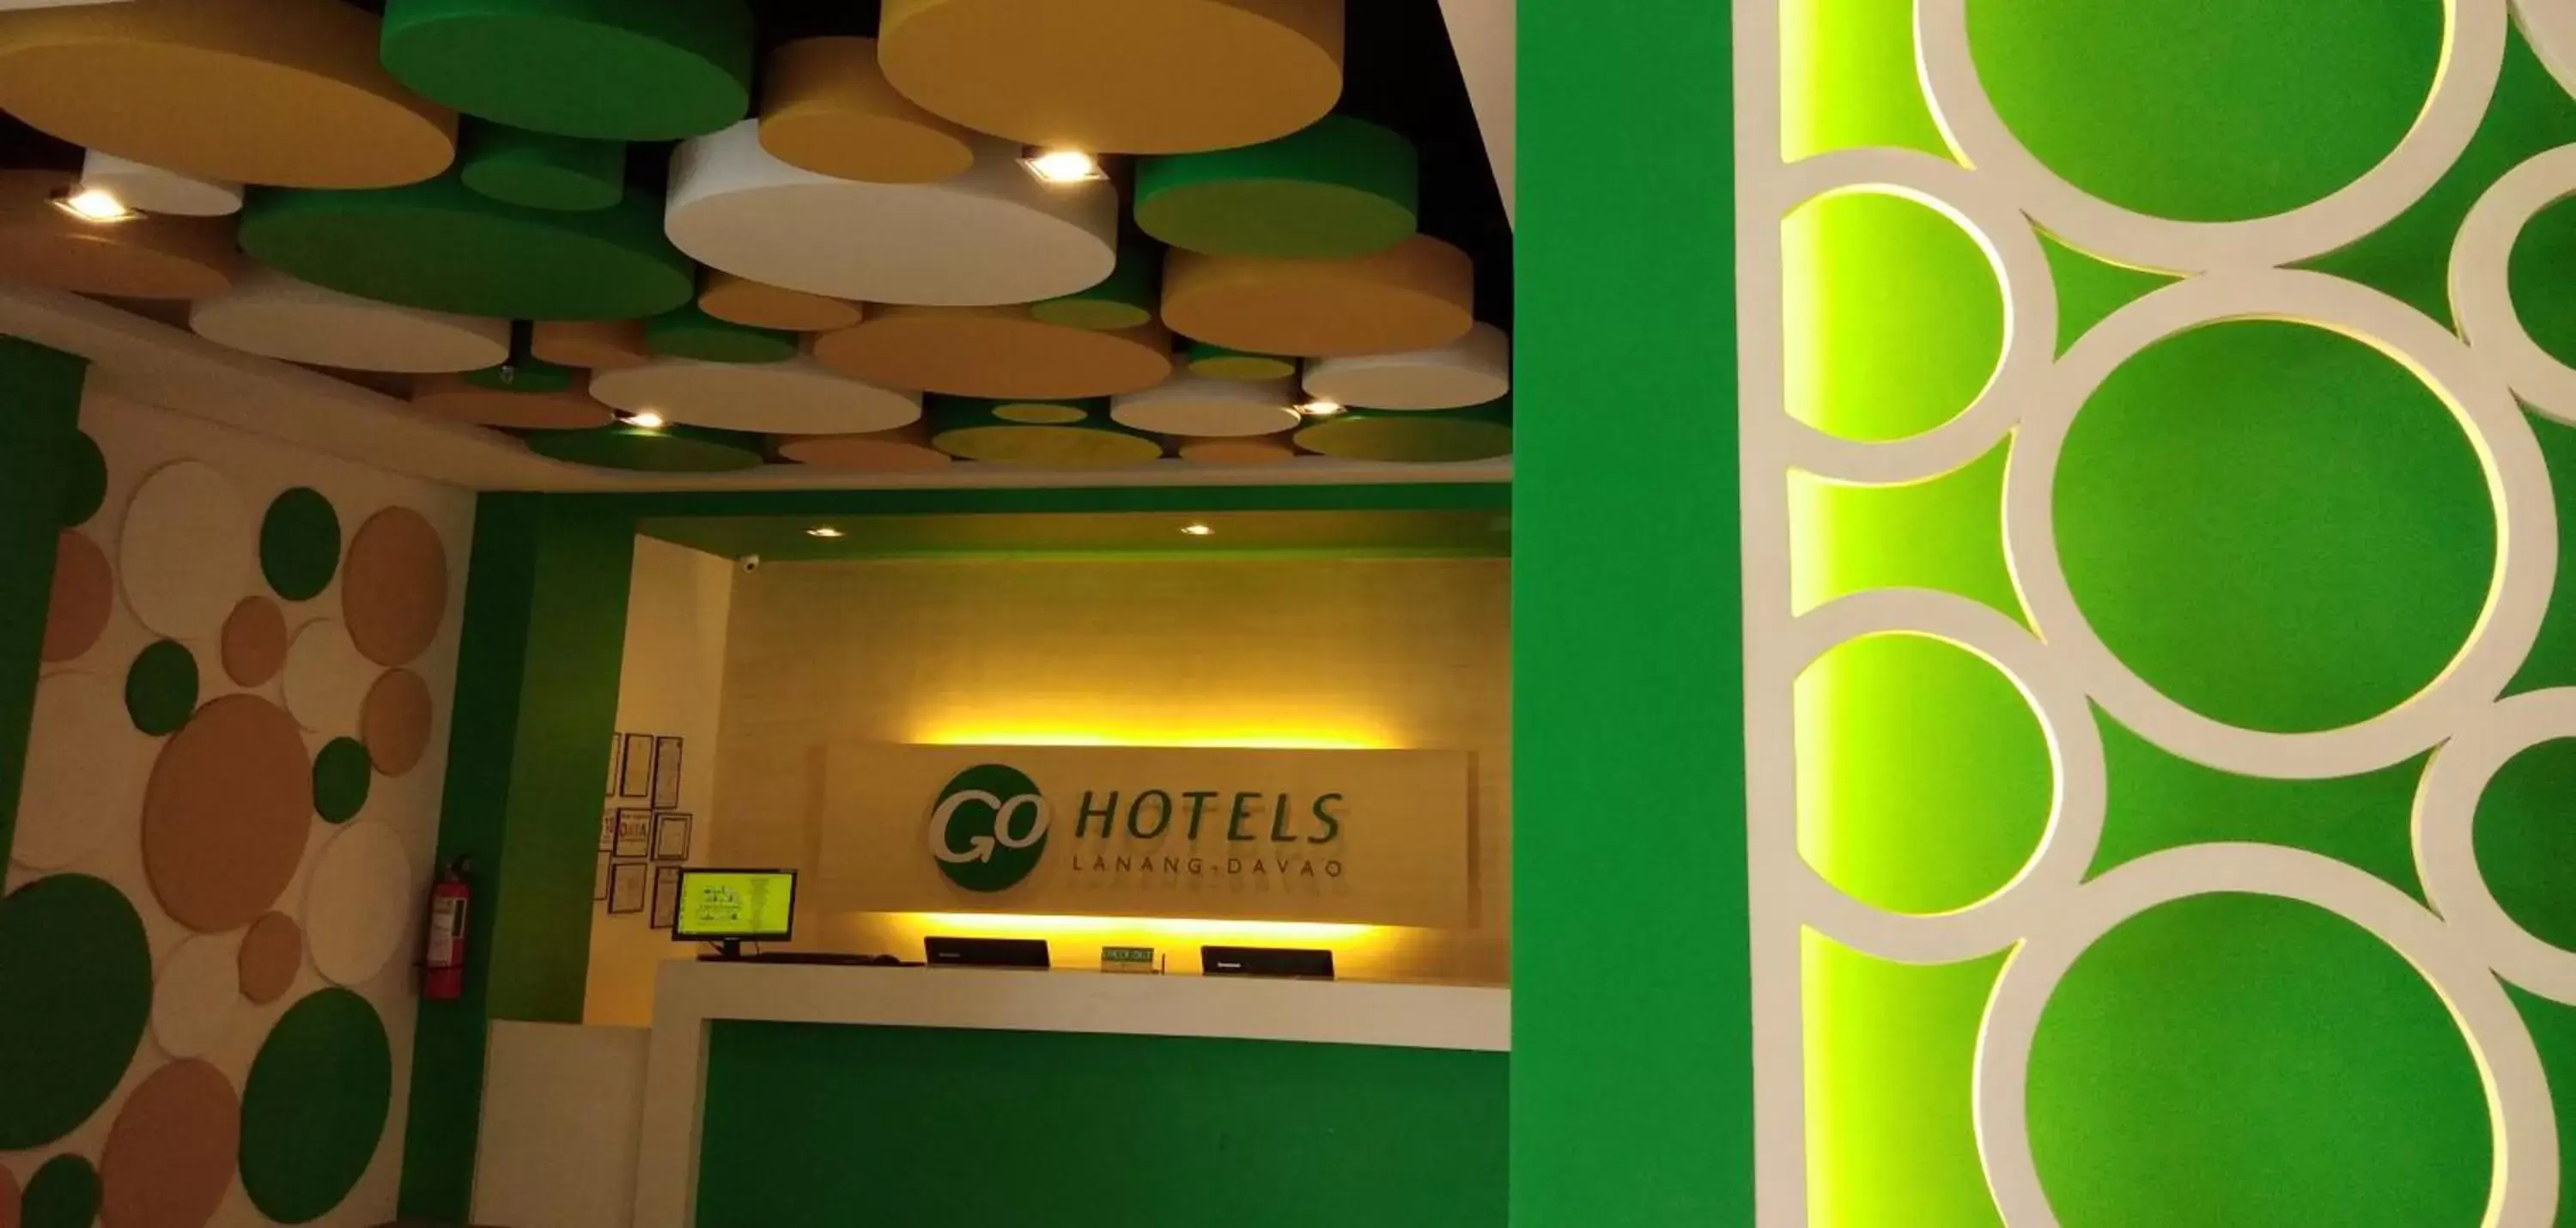 Property logo or sign, Lobby/Reception in Go Hotels Lanang - Davao